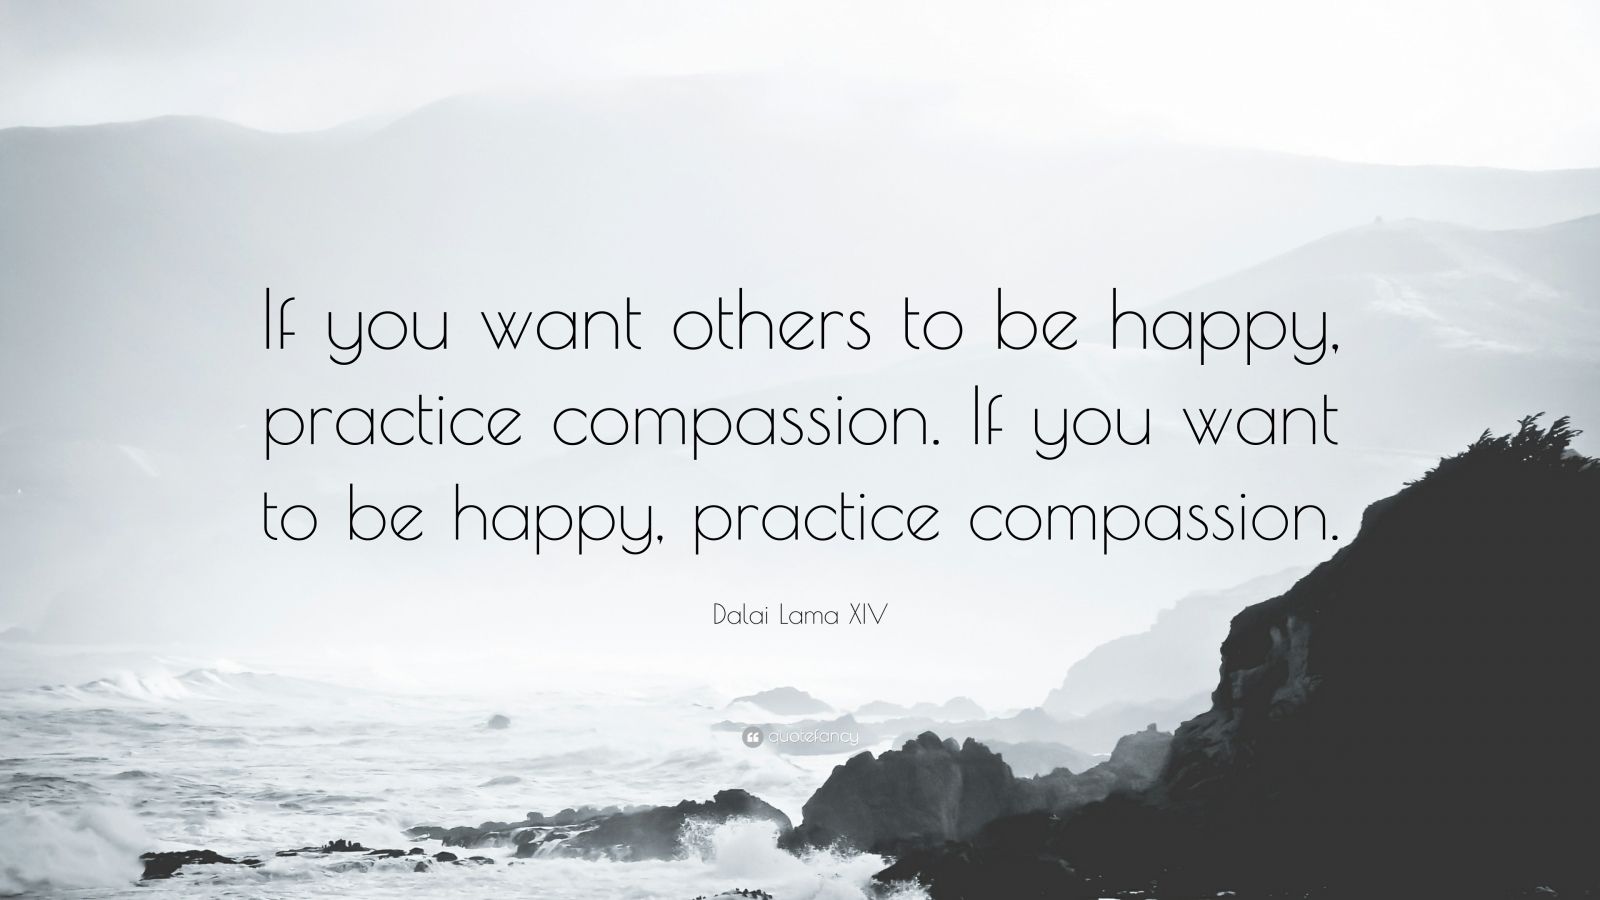 Dalai Lama XIV Quote: “If you want others to be happy, practice